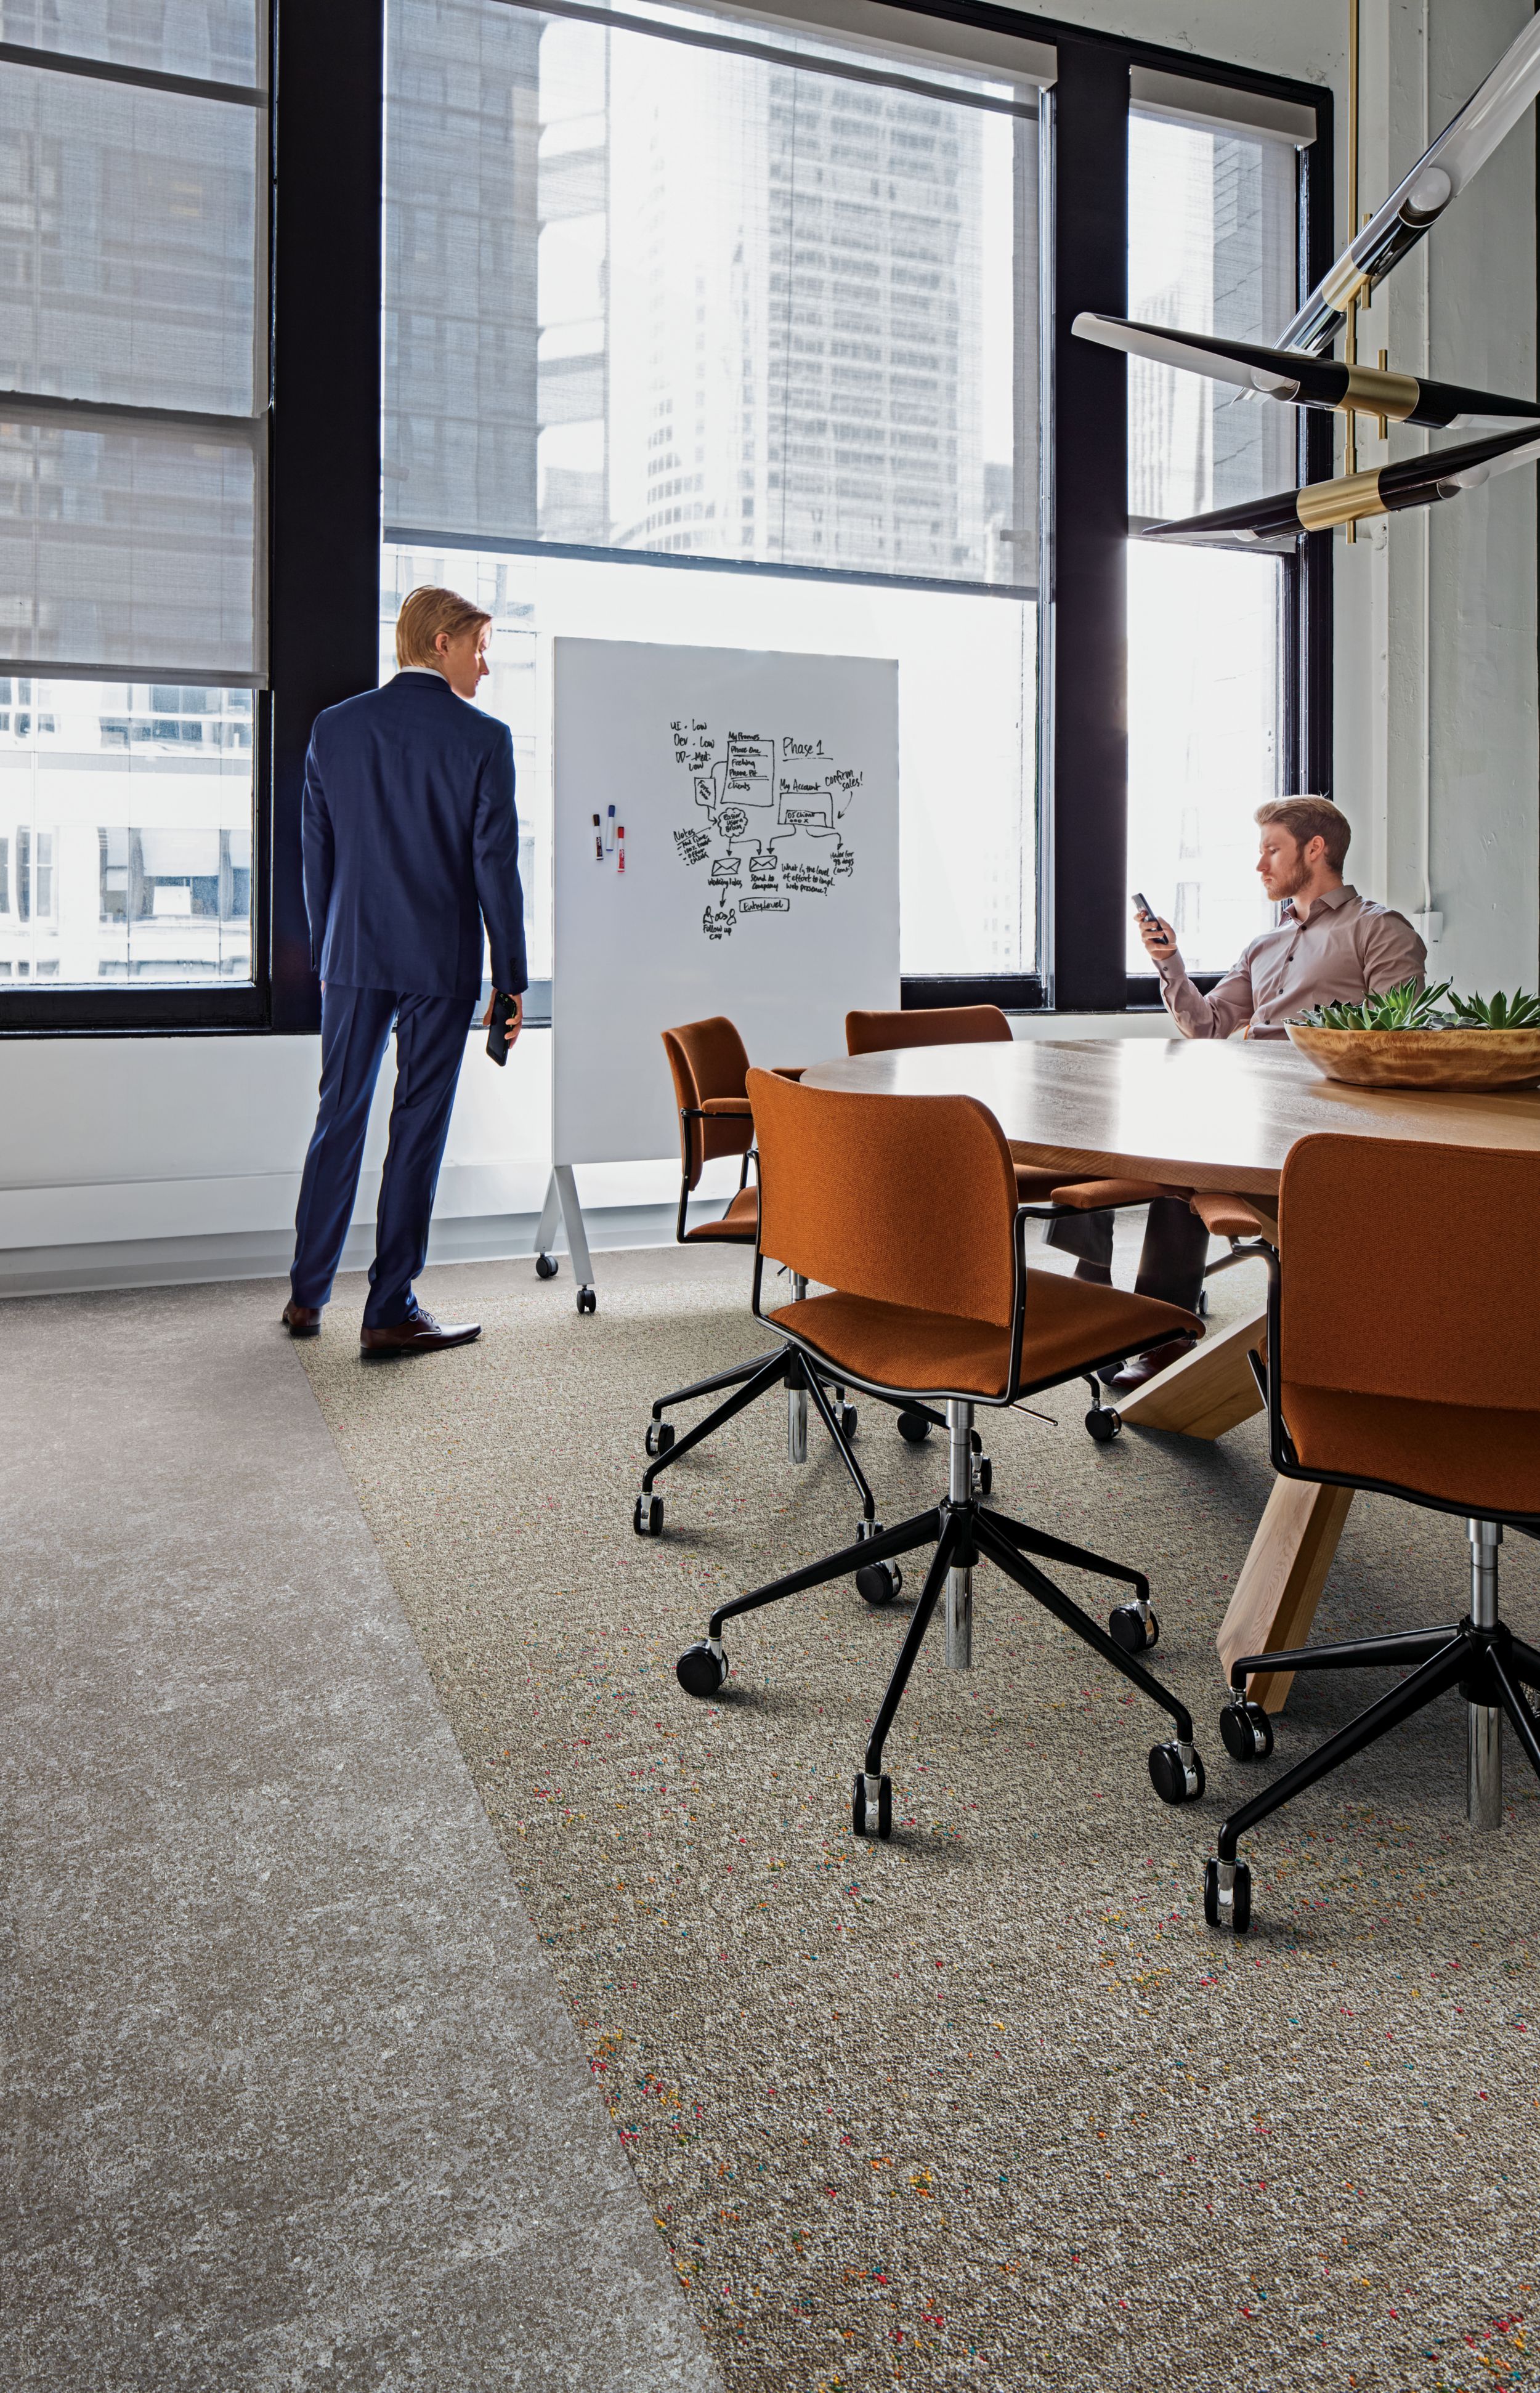 Interface Walk of Life LVT and Step Aside carpet tile in meeting space with conference table and chairs Bildnummer 10